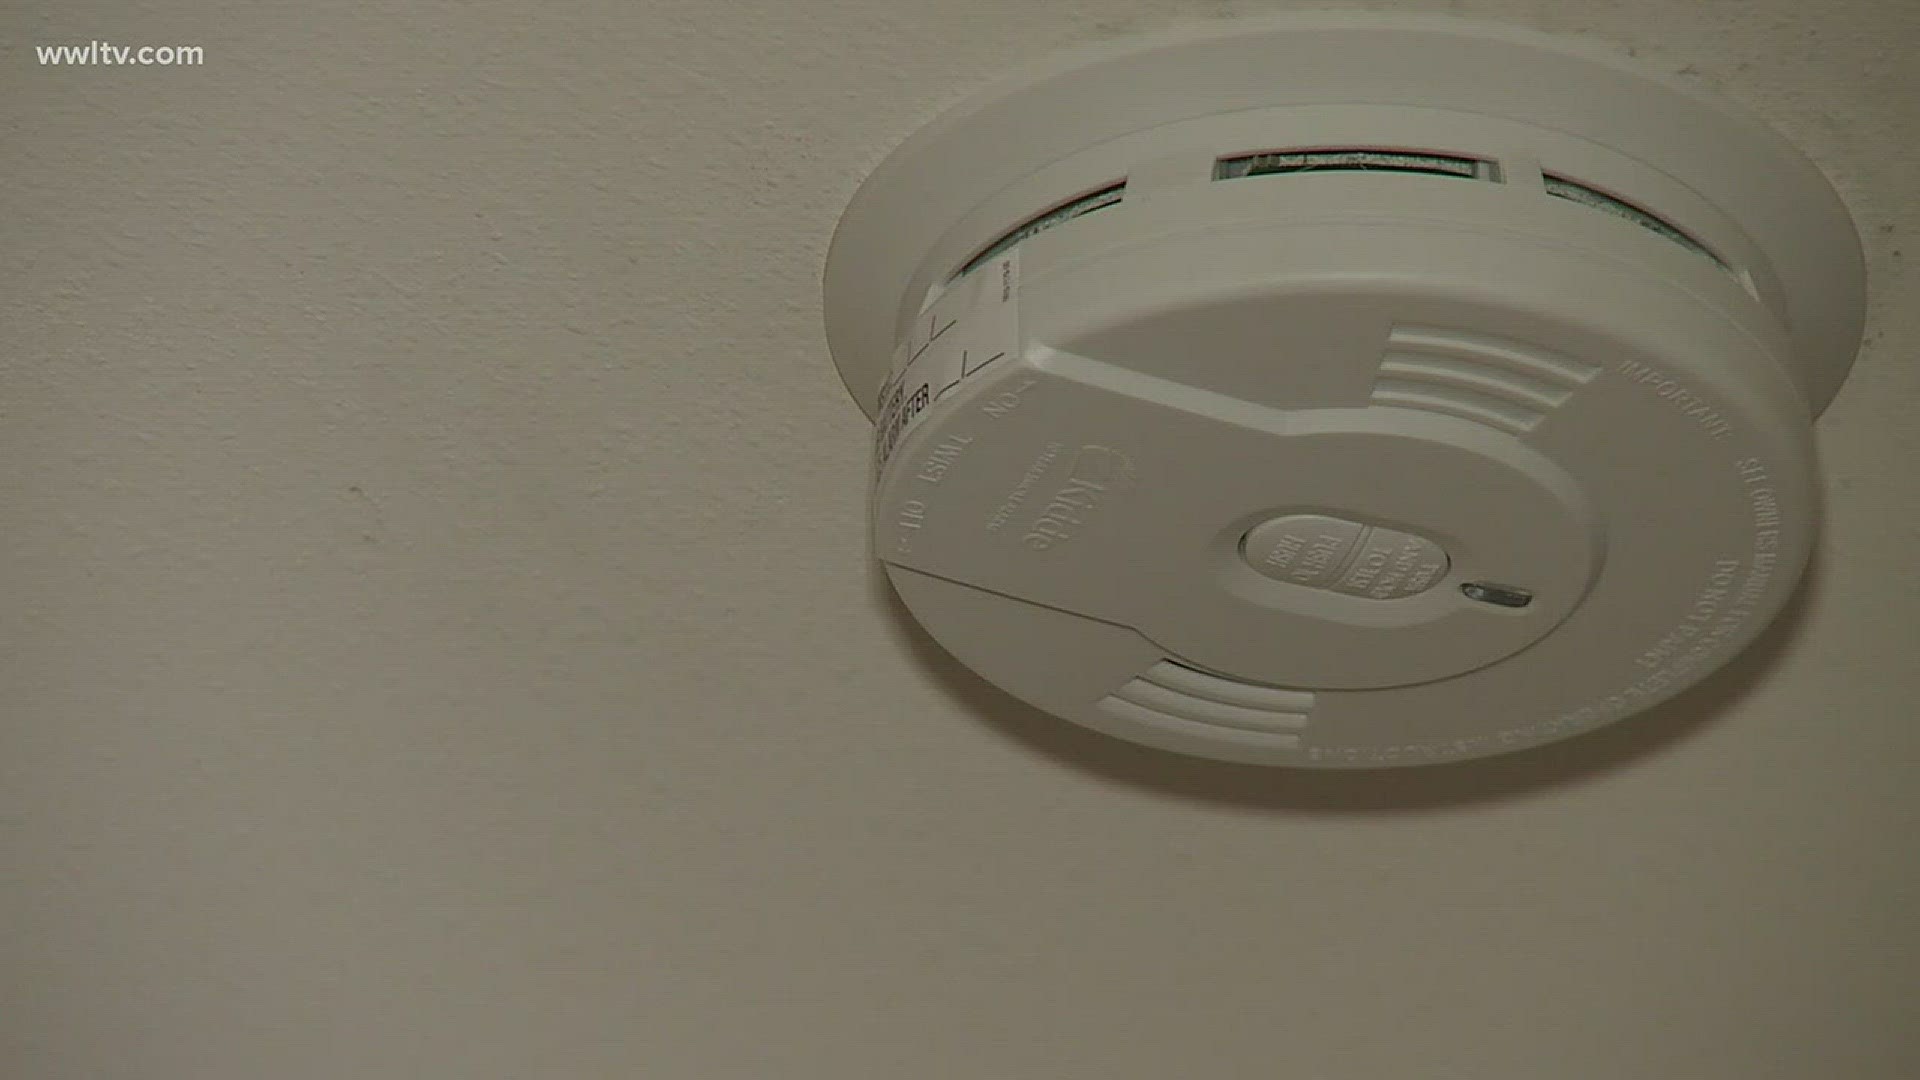 The State Fire Marshal's Office and NOFD are offering free smoke detectors.